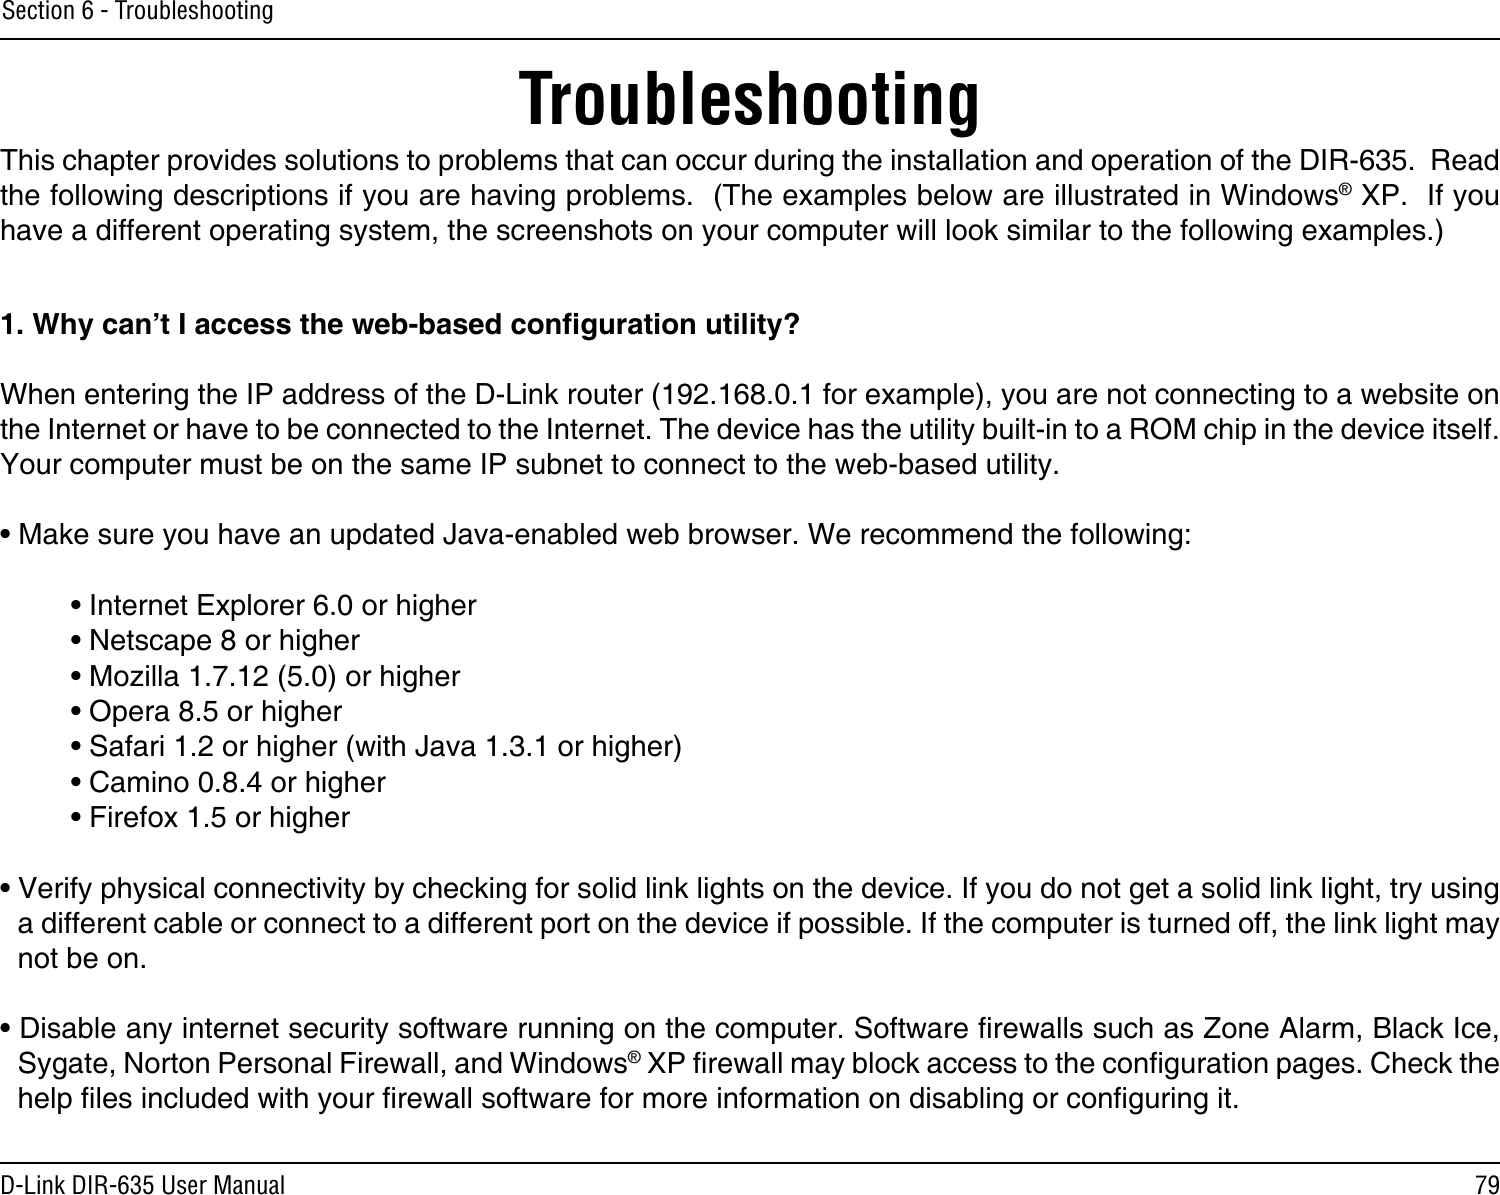 79D-Link DIR-635 User ManualSection 6 - TroubleshootingTroubleshootingThis chapter provides solutions to problems that can occur during the installation and operation of the DIR-635.  Read the following descriptions if you are having problems.  (The examples below are illustrated in Windows® XP.  If you have a different operating system, the screenshots on your computer will look similar to the following examples.)1. Why can’t I access the web-based conguration utility?When entering the IP address of the D-Link router (192.168.0.1 for example), you are not connecting to a website on the Internet or have to be connected to the Internet. The device has the utility built-in to a ROM chip in the device itself. Your computer must be on the same IP subnet to connect to the web-based utility. • Make sure you have an updated Java-enabled web browser. We recommend the following: • Internet Explorer 6.0 or higher • Netscape 8 or higher • Mozilla 1.7.12 (5.0) or higher • Opera 8.5 or higher • Safari 1.2 or higher (with Java 1.3.1 or higher) • Camino 0.8.4 or higher • Firefox 1.5 or higher • Verify physical connectivity by checking for solid link lights on the device. If you do not get a solid link light, try using a different cable or connect to a different port on the device if possible. If the computer is turned off, the link light may not be on.• Disable any internet security software running on the computer. Software rewalls such as Zone Alarm, Black Ice, Sygate, Norton Personal Firewall, and Windows® XP rewall may block access to the conguration pages. Check the help les included with your rewall software for more information on disabling or conguring it.